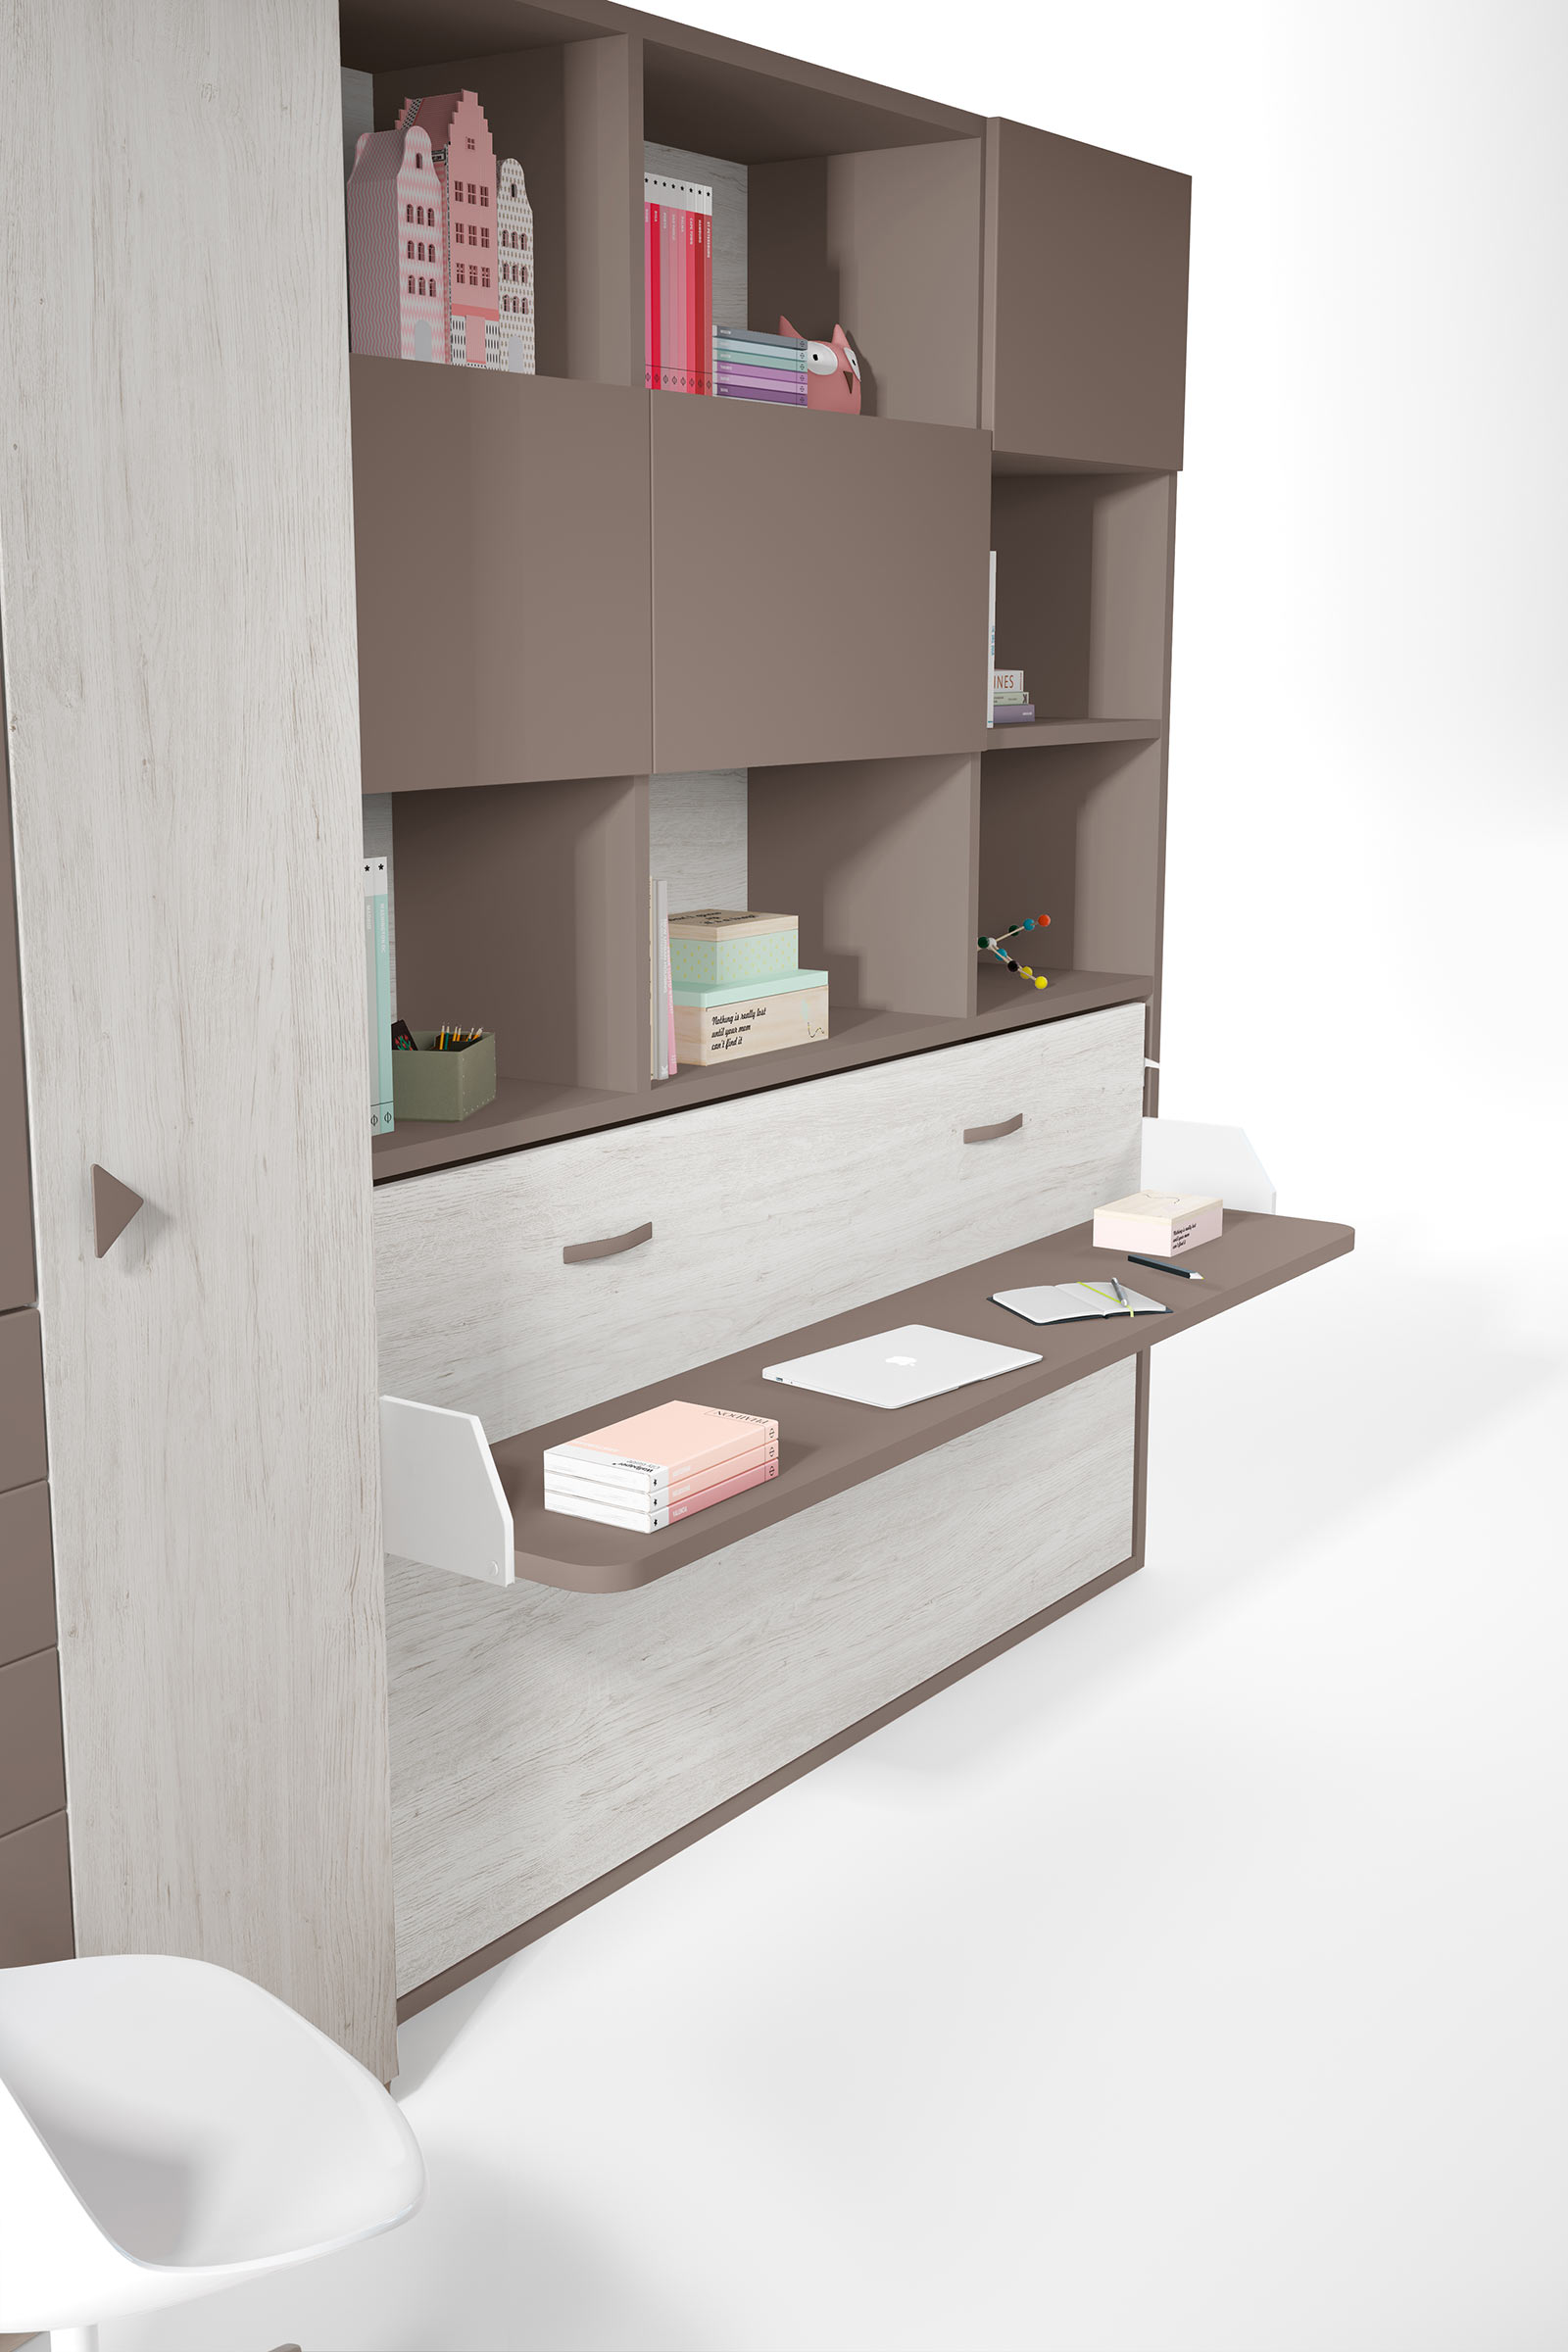 Space Deskbed The London Wallbed Company, Bookcase With Fold Down Desk Uk